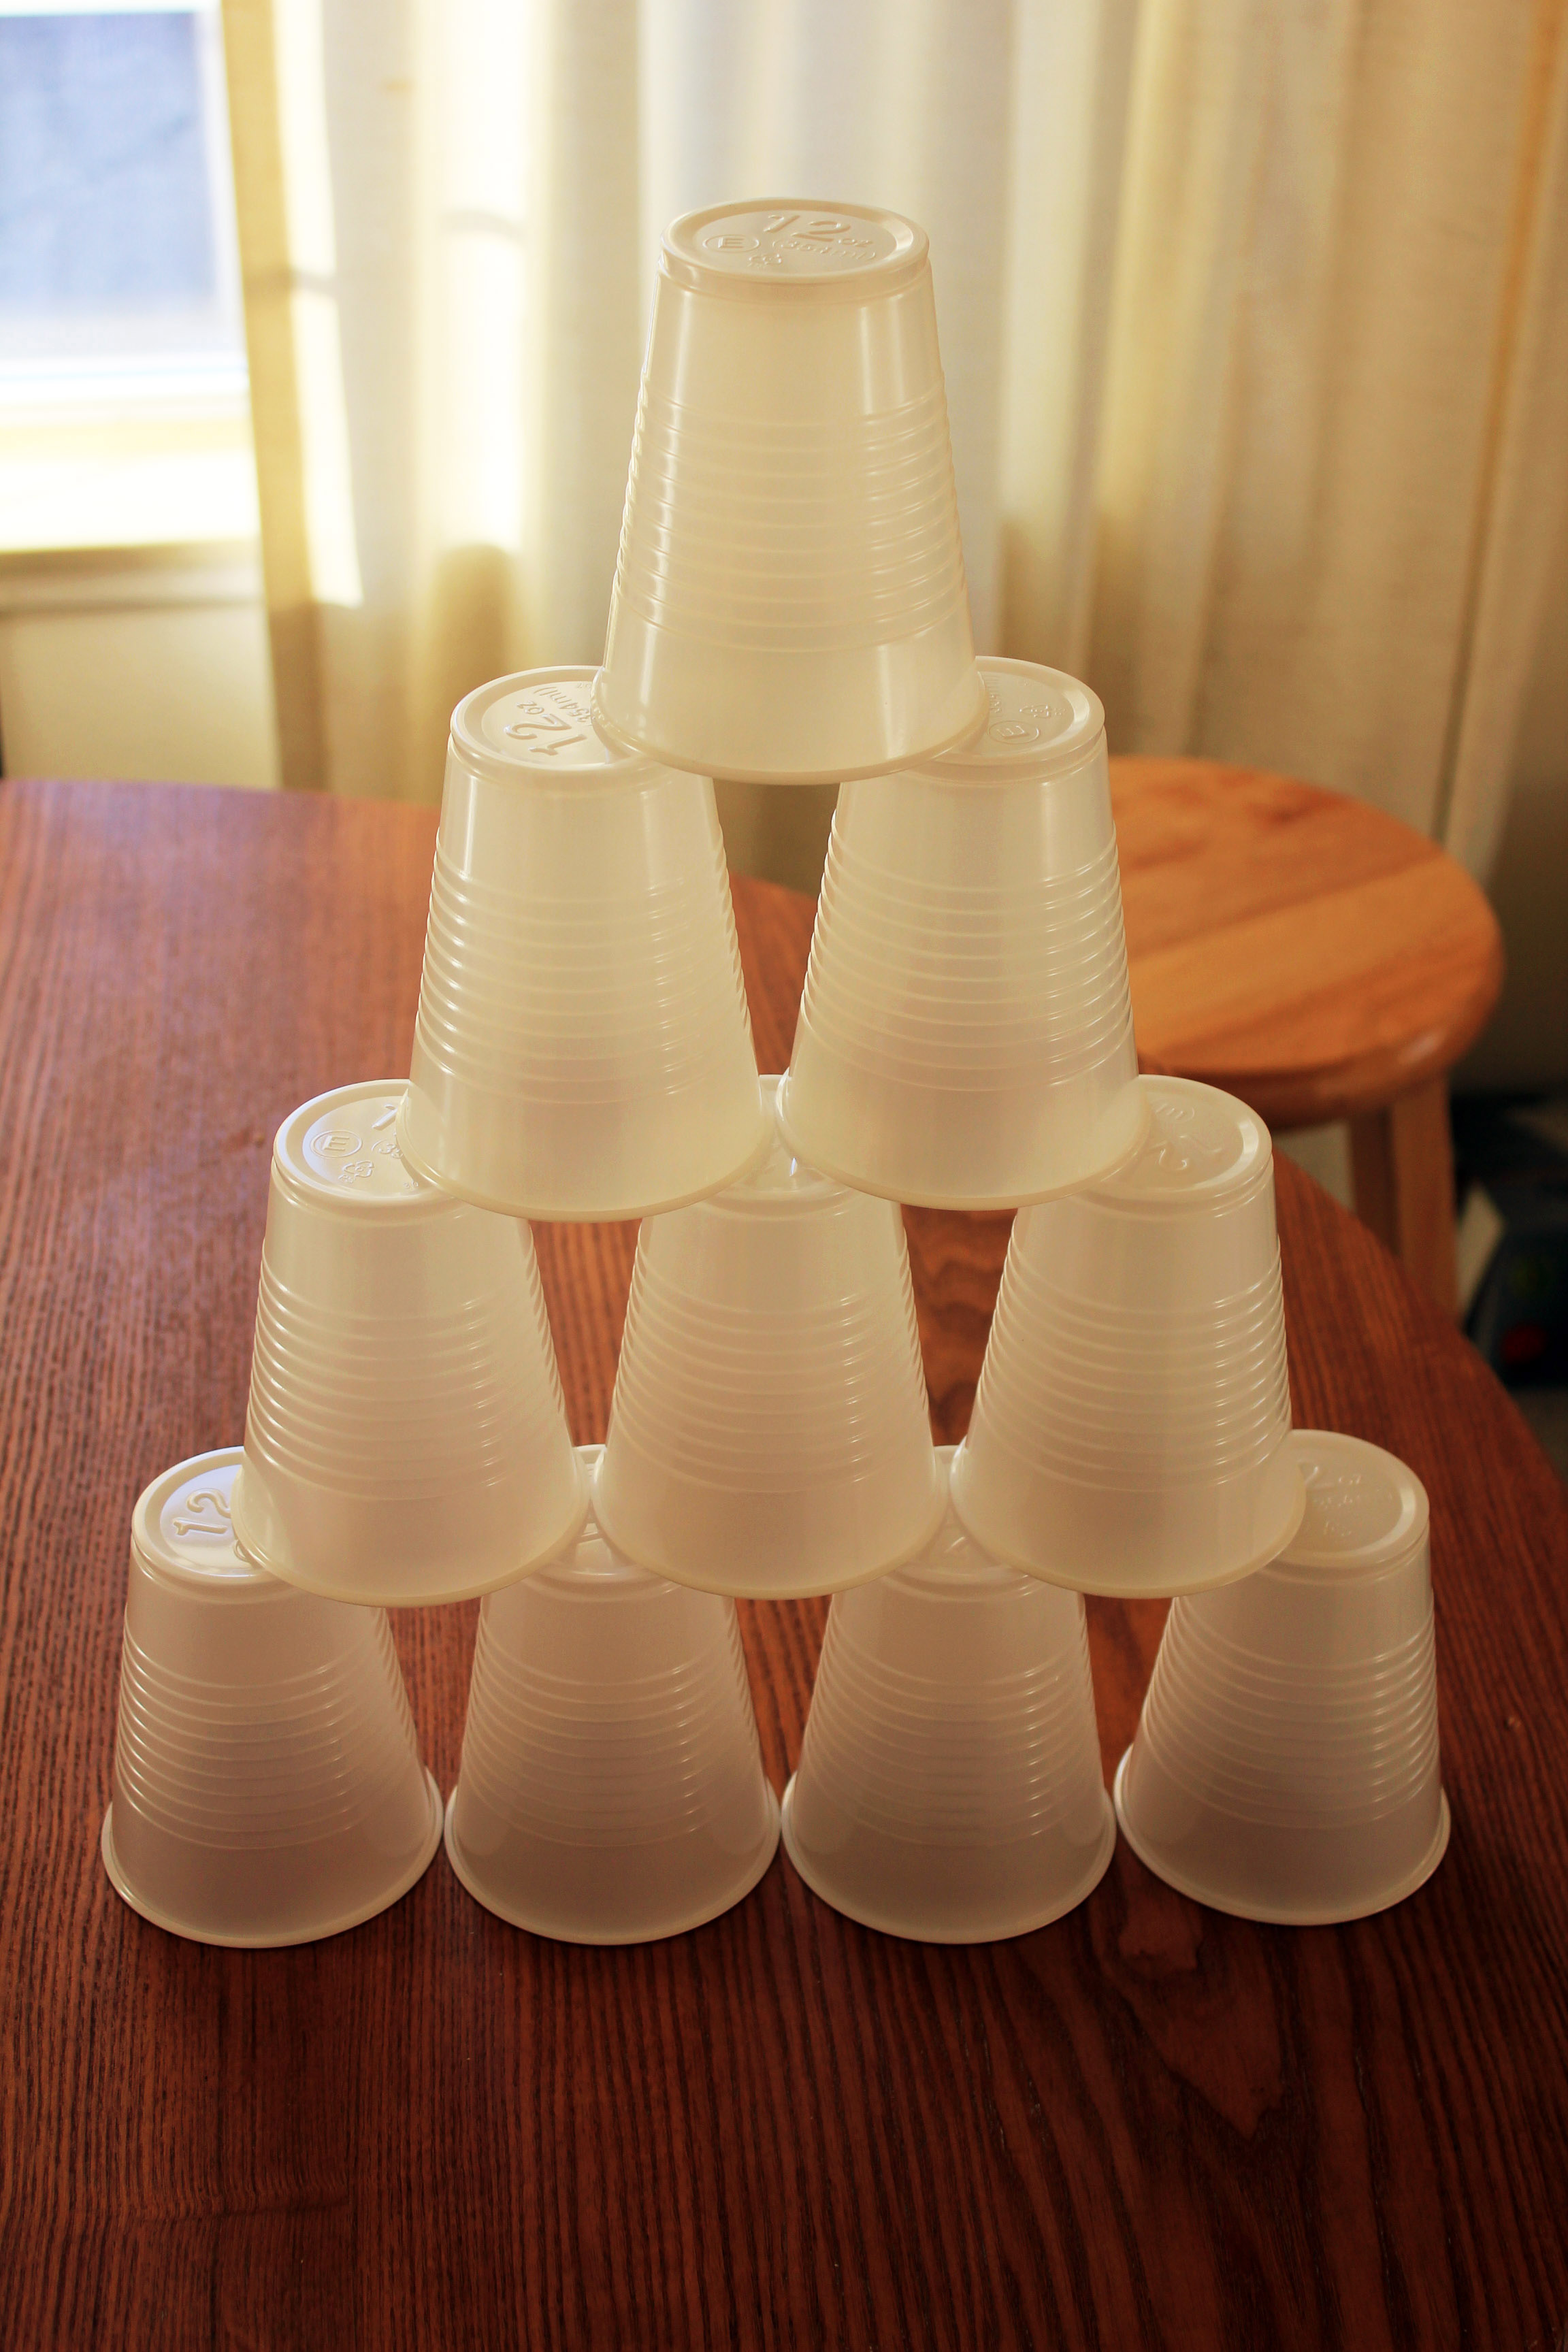 ten, clear plastic cups stacked, with four cups on the bottom, threes cups stacked on top of those, then two cups on top of the three, finally one cup on the very top